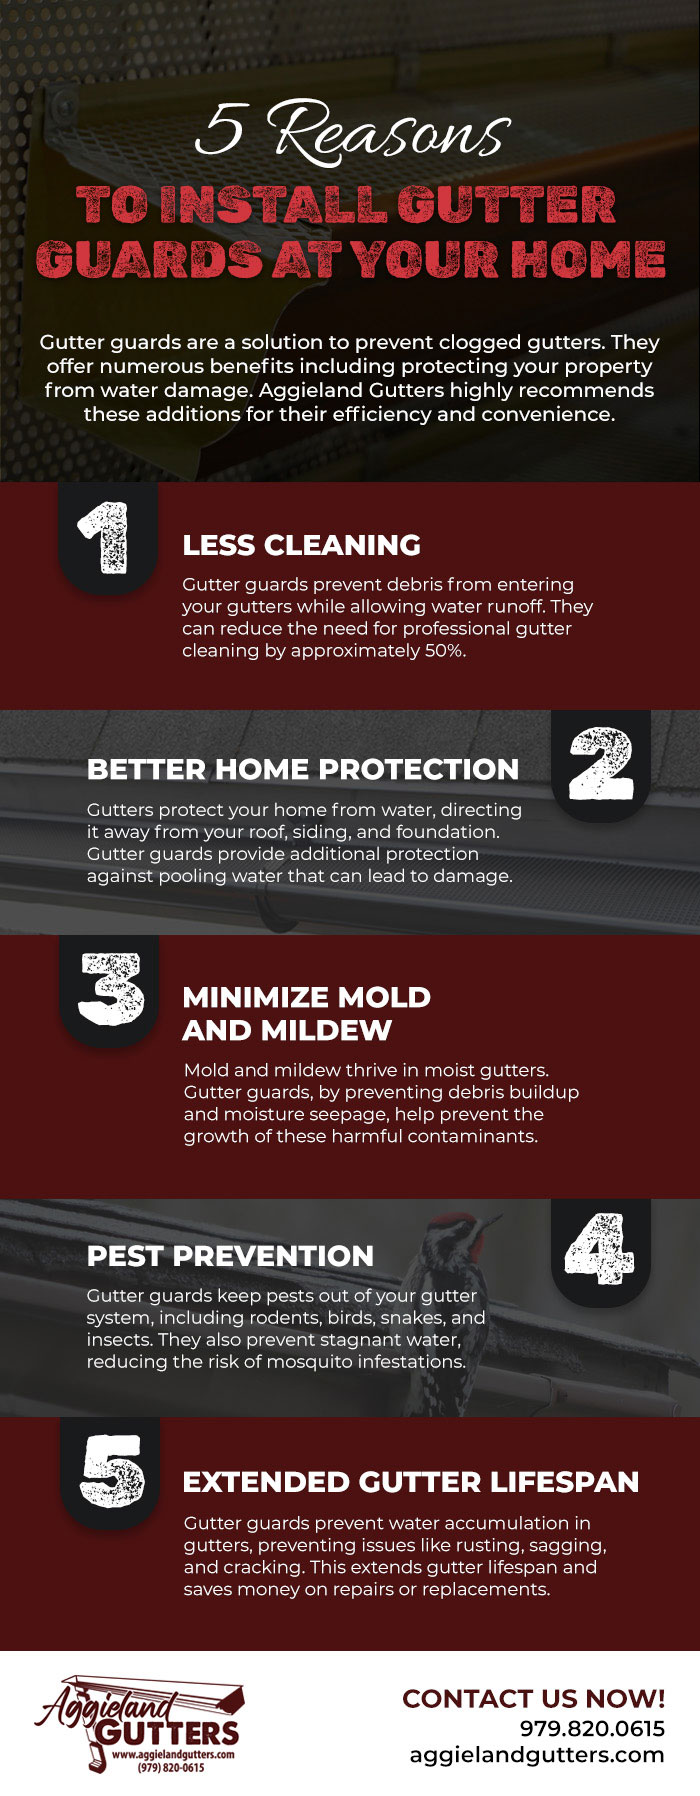 Top Reasons to Install Gutter Guards at Your Home